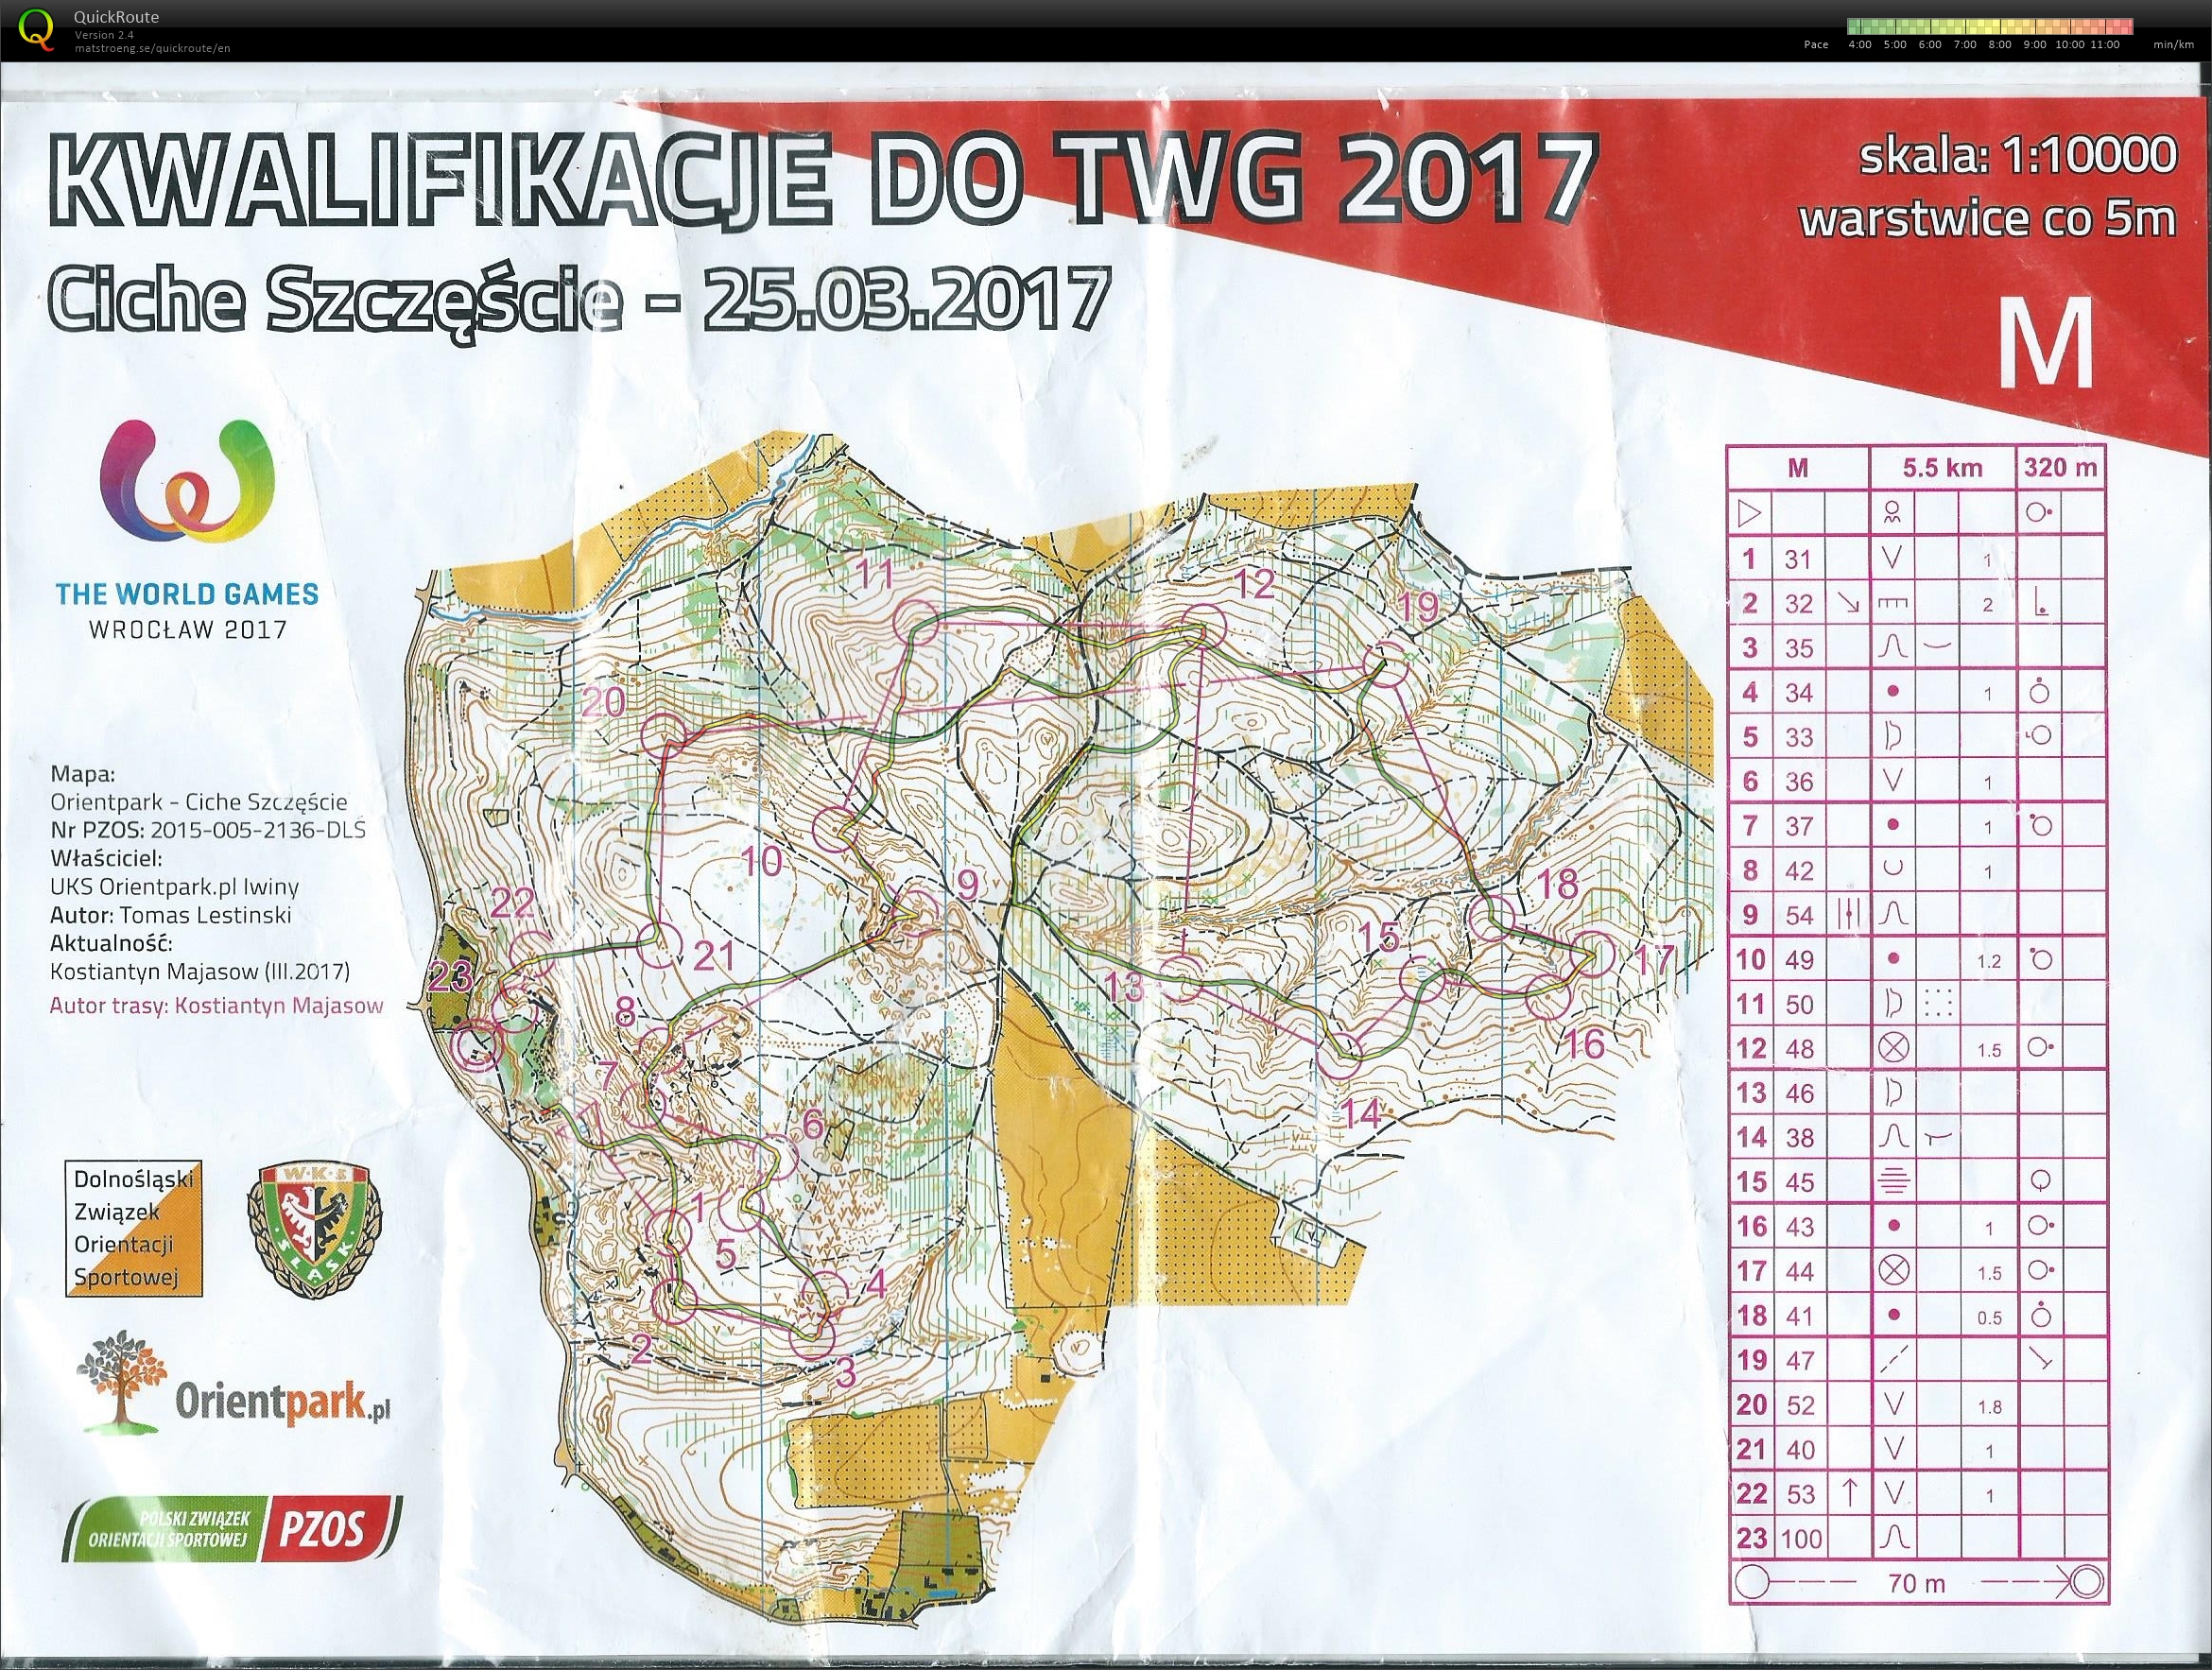 Z481 - TWG 2017 - Qualification - Middle (25-03-2017)